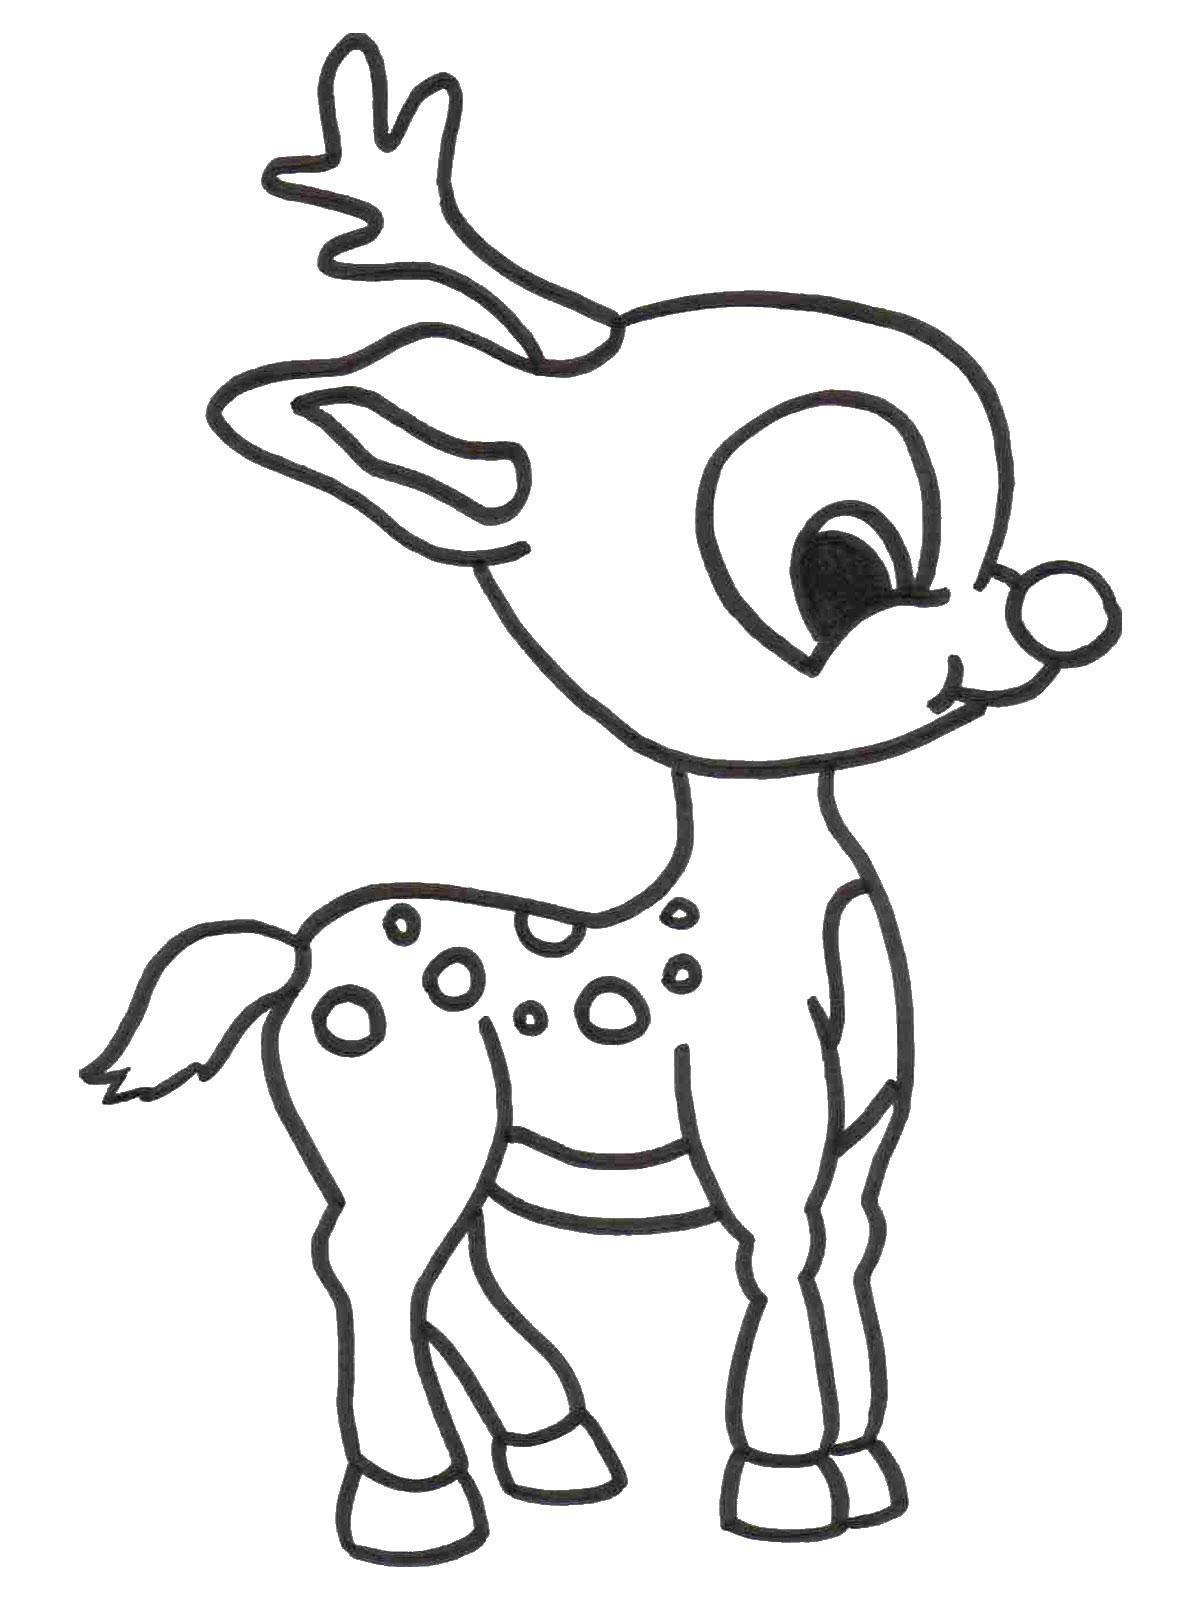 Coloring Fawn. Category Coloring pages for kids. Tags:  the deer.